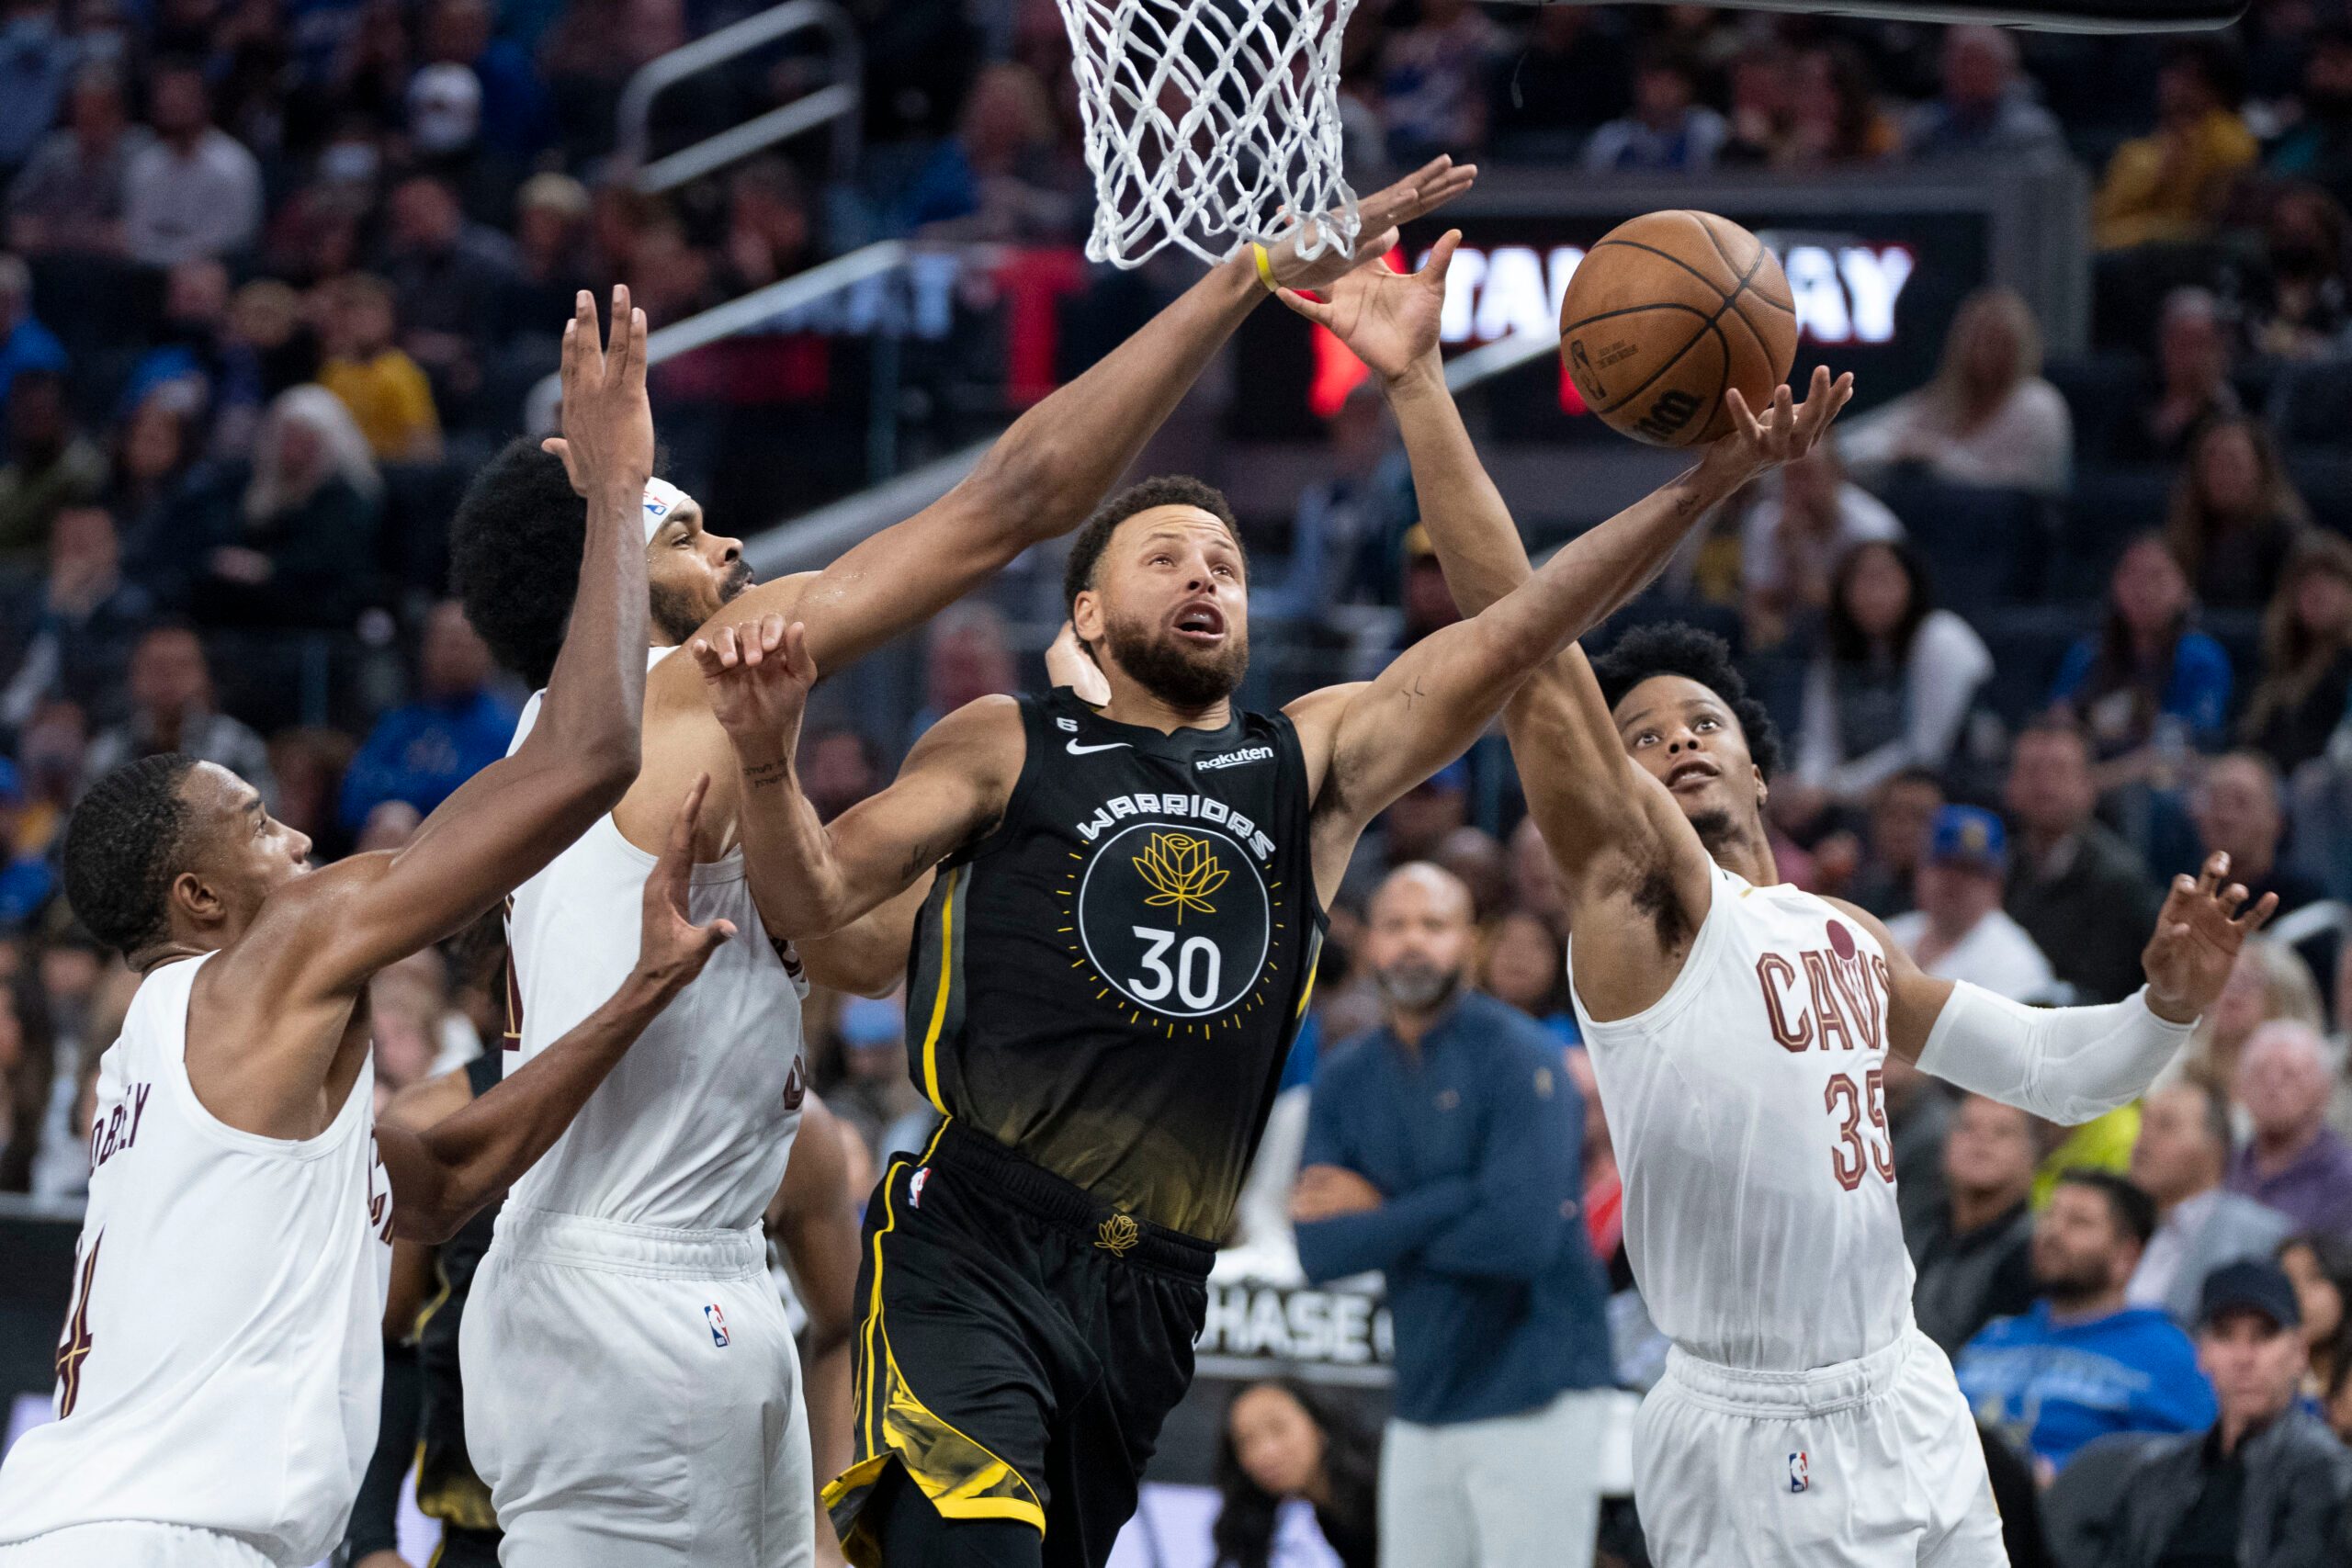 Curry drops 40 as Warriors escape rival Cavaliers